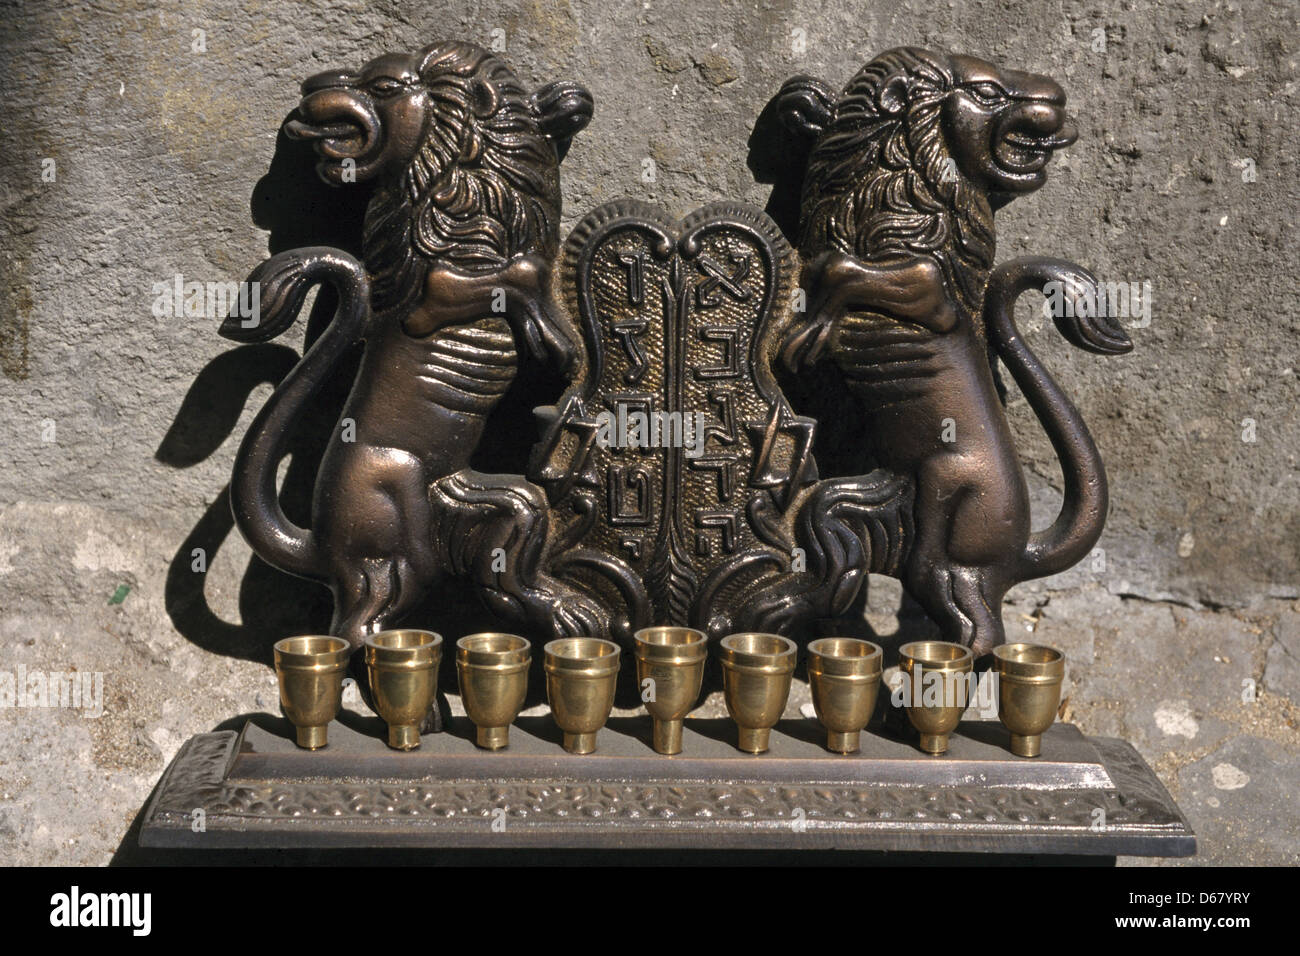 An old decorative bronze menorah lamp, which is a traditional nine-branched candelabrum for use during the Jewish holiday of Hanukkah, the festival of lights Stock Photo